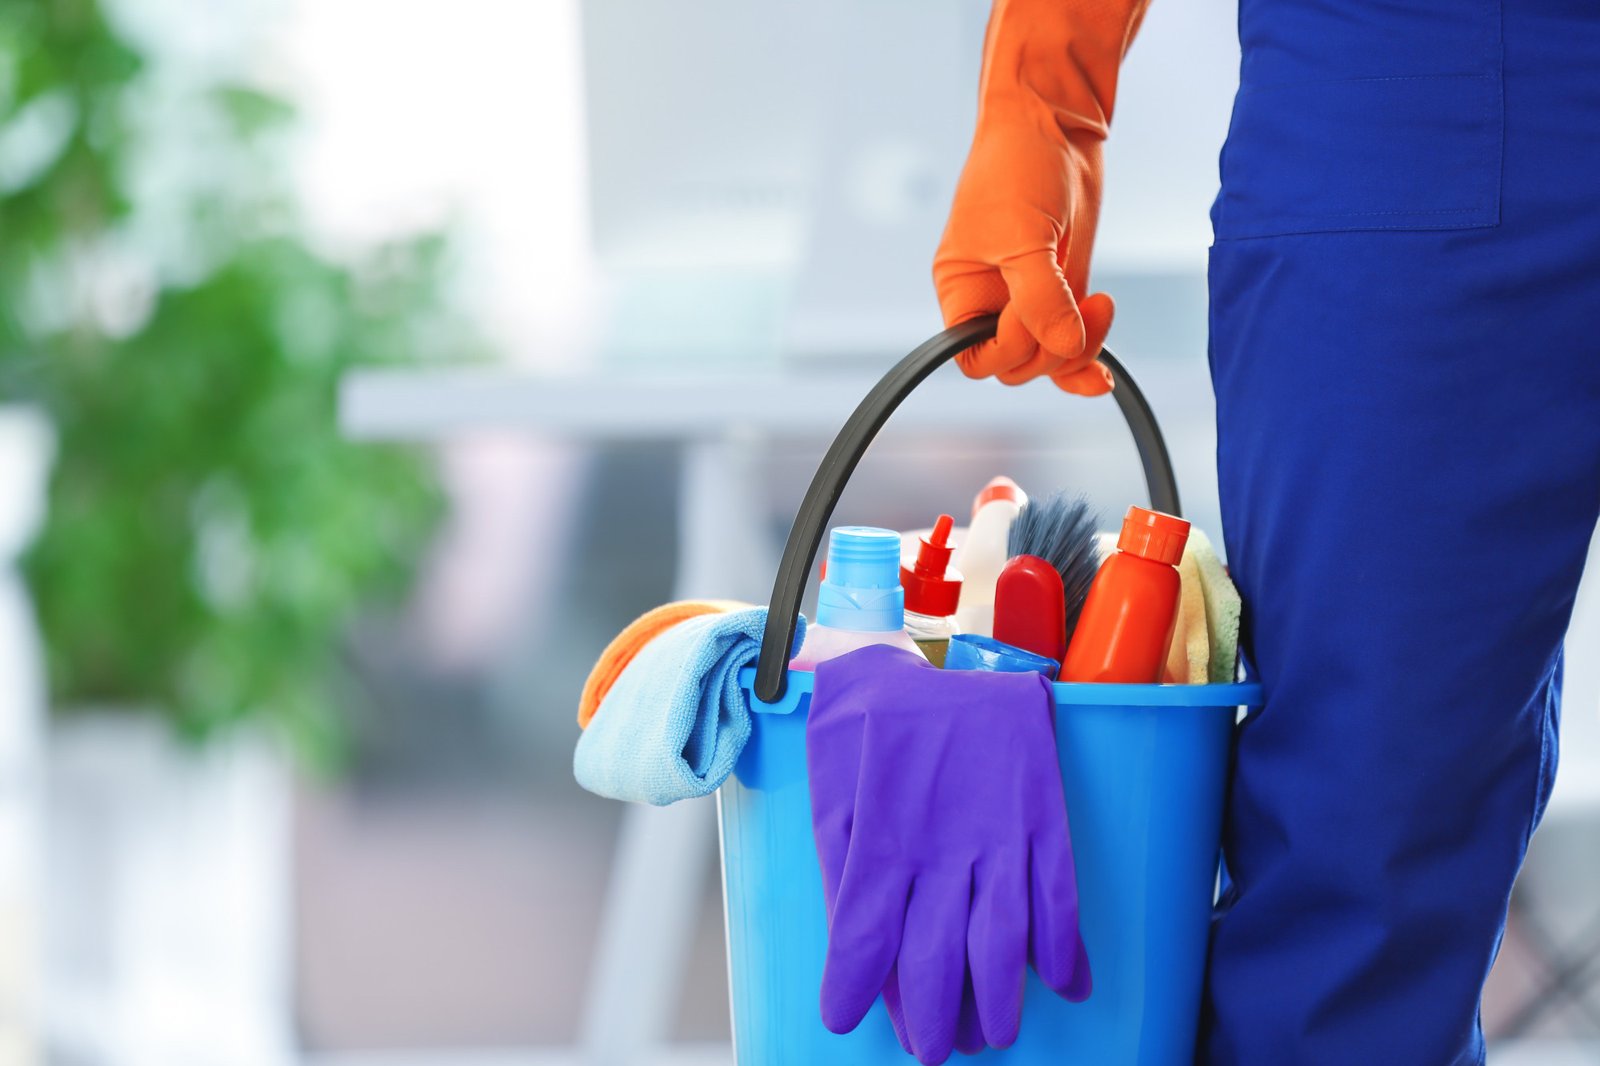 Affordable Cleaning Services